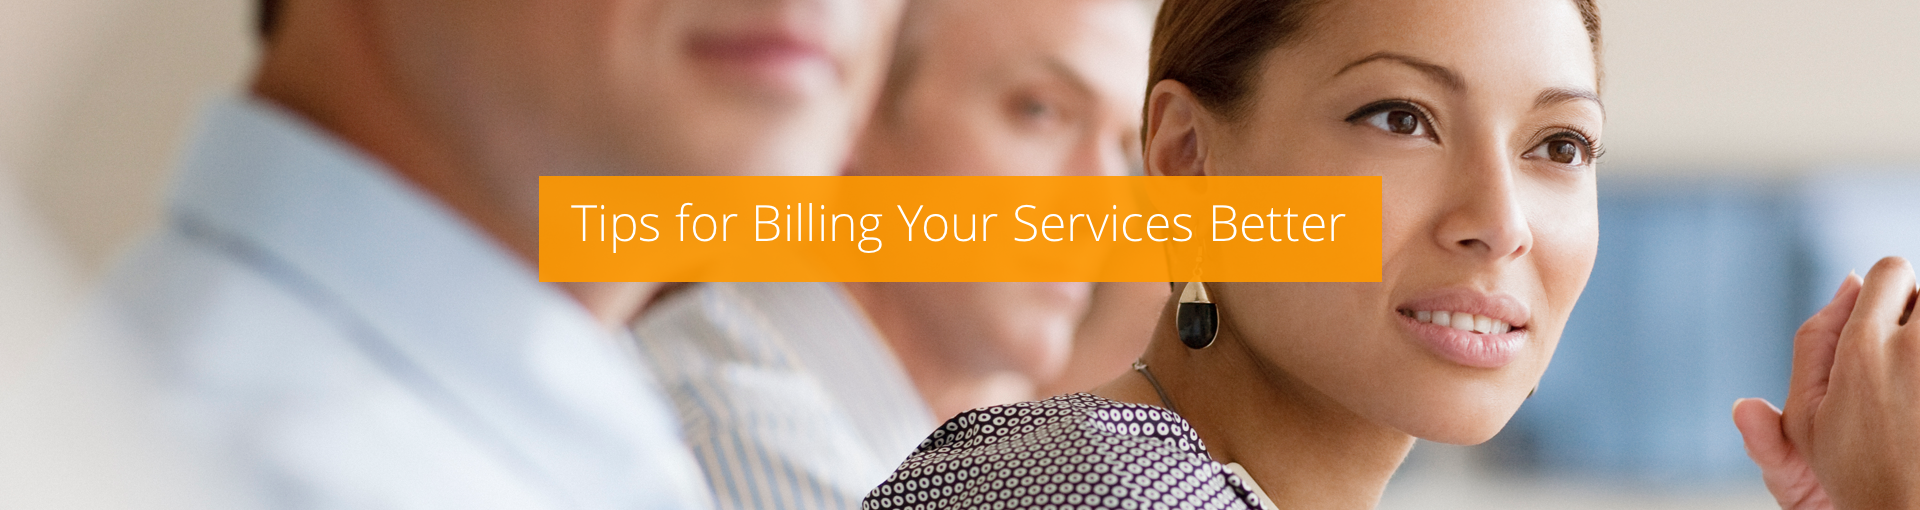 Tips for Billing Your Services Better Featured Image